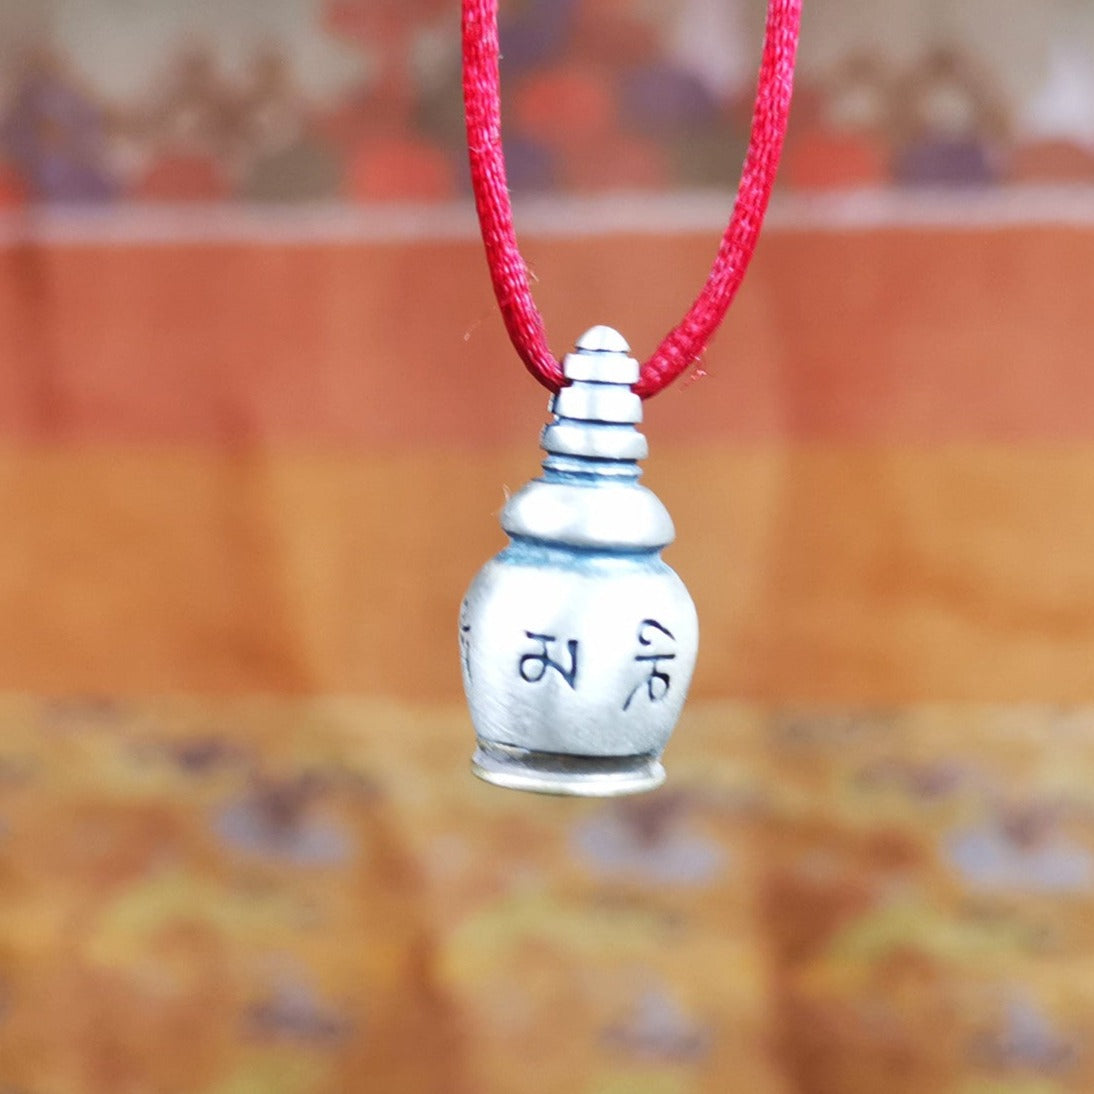 This beautiful stupa gau shrine was handmade by Tibetan craftsmen from Tibet in 2000s. It was made of silver and brass,the OM MANI PADME HUM mantra engraved on its side, the top bottle cap can be opened and you can place offerings inside,like mani rilbu or zung Consecration. The om mantra at the bottom can be used as a seal. You can make it into a necklace, or a keychain, or just put it in your shrine or altar.